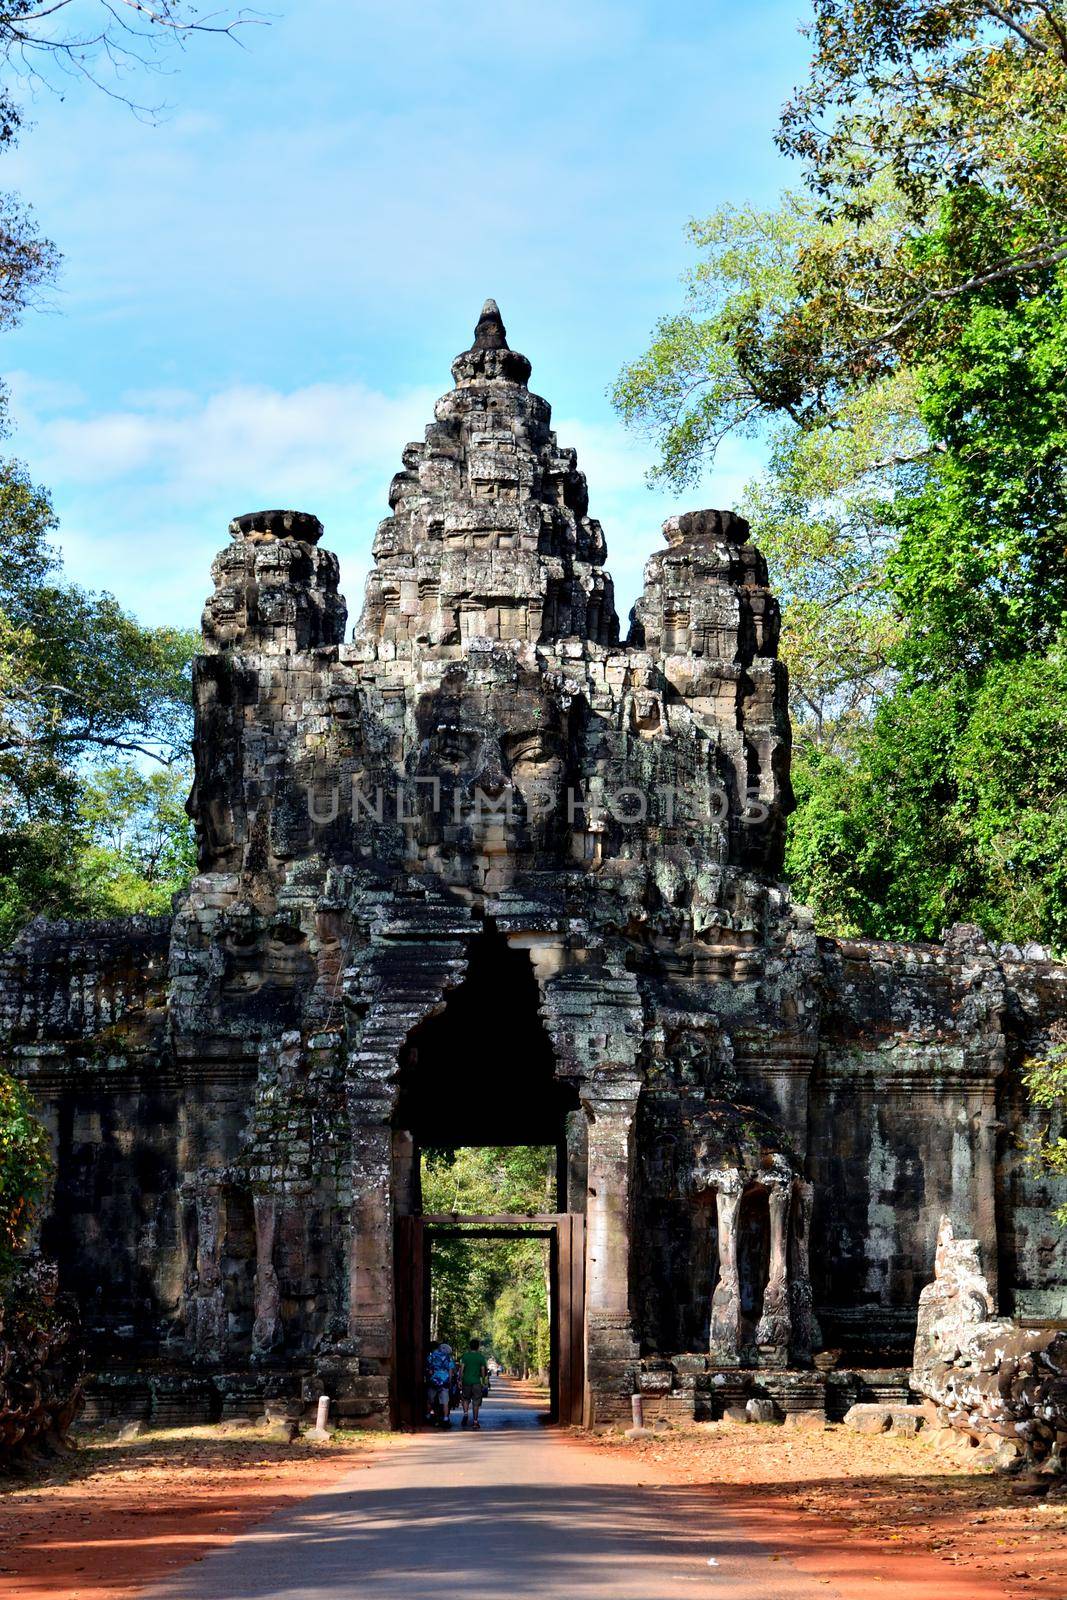 View of the magnificent entrance to the complex of Angkor Thom, Cambodia